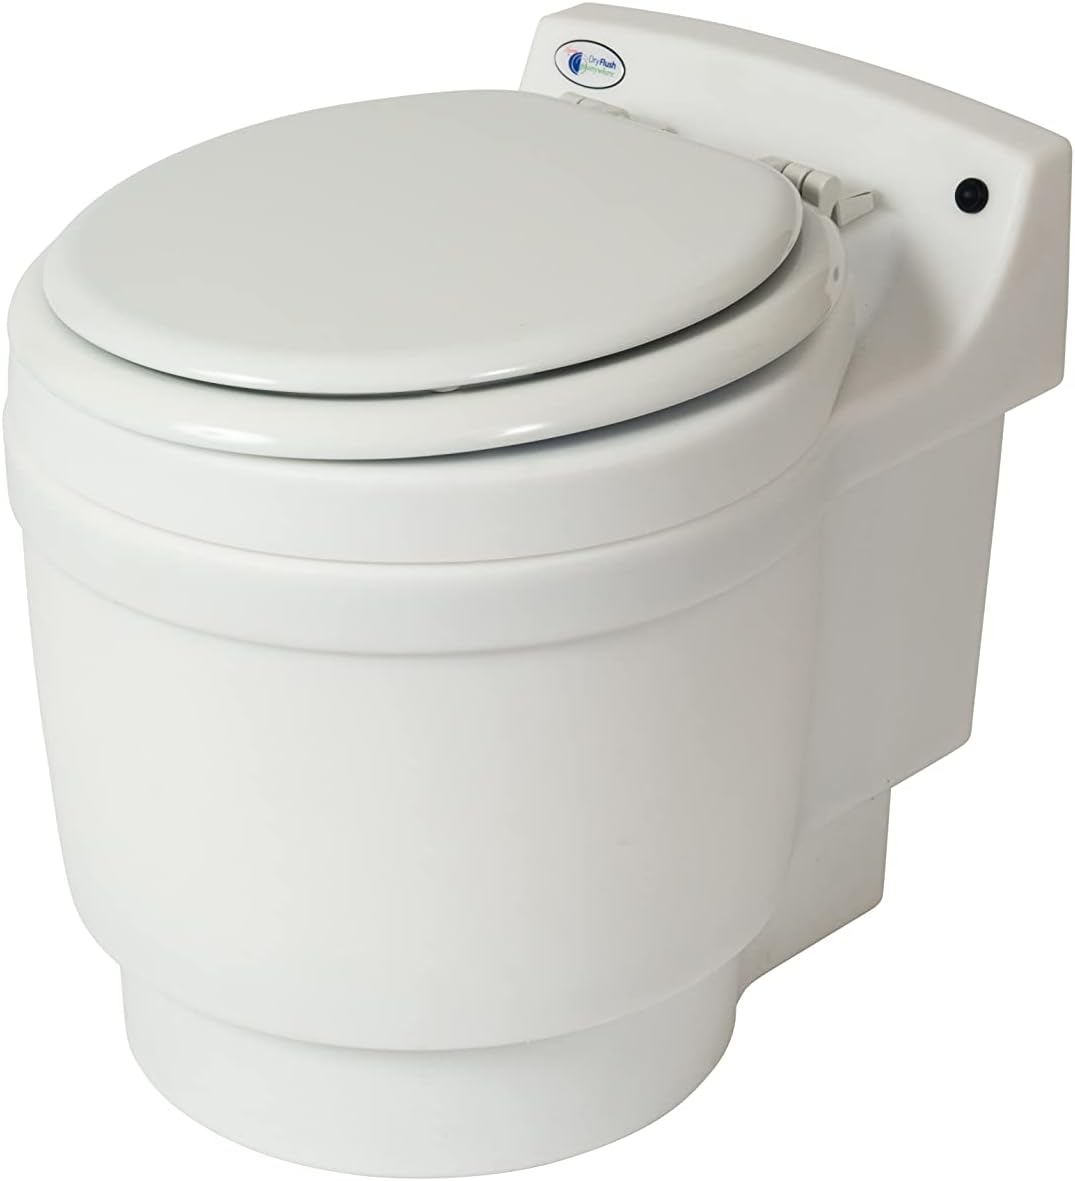 Dry Flush DF1045DC Laveo Waterless Portable Toilet with 12V DC Power Cord Car Adapter Plug New